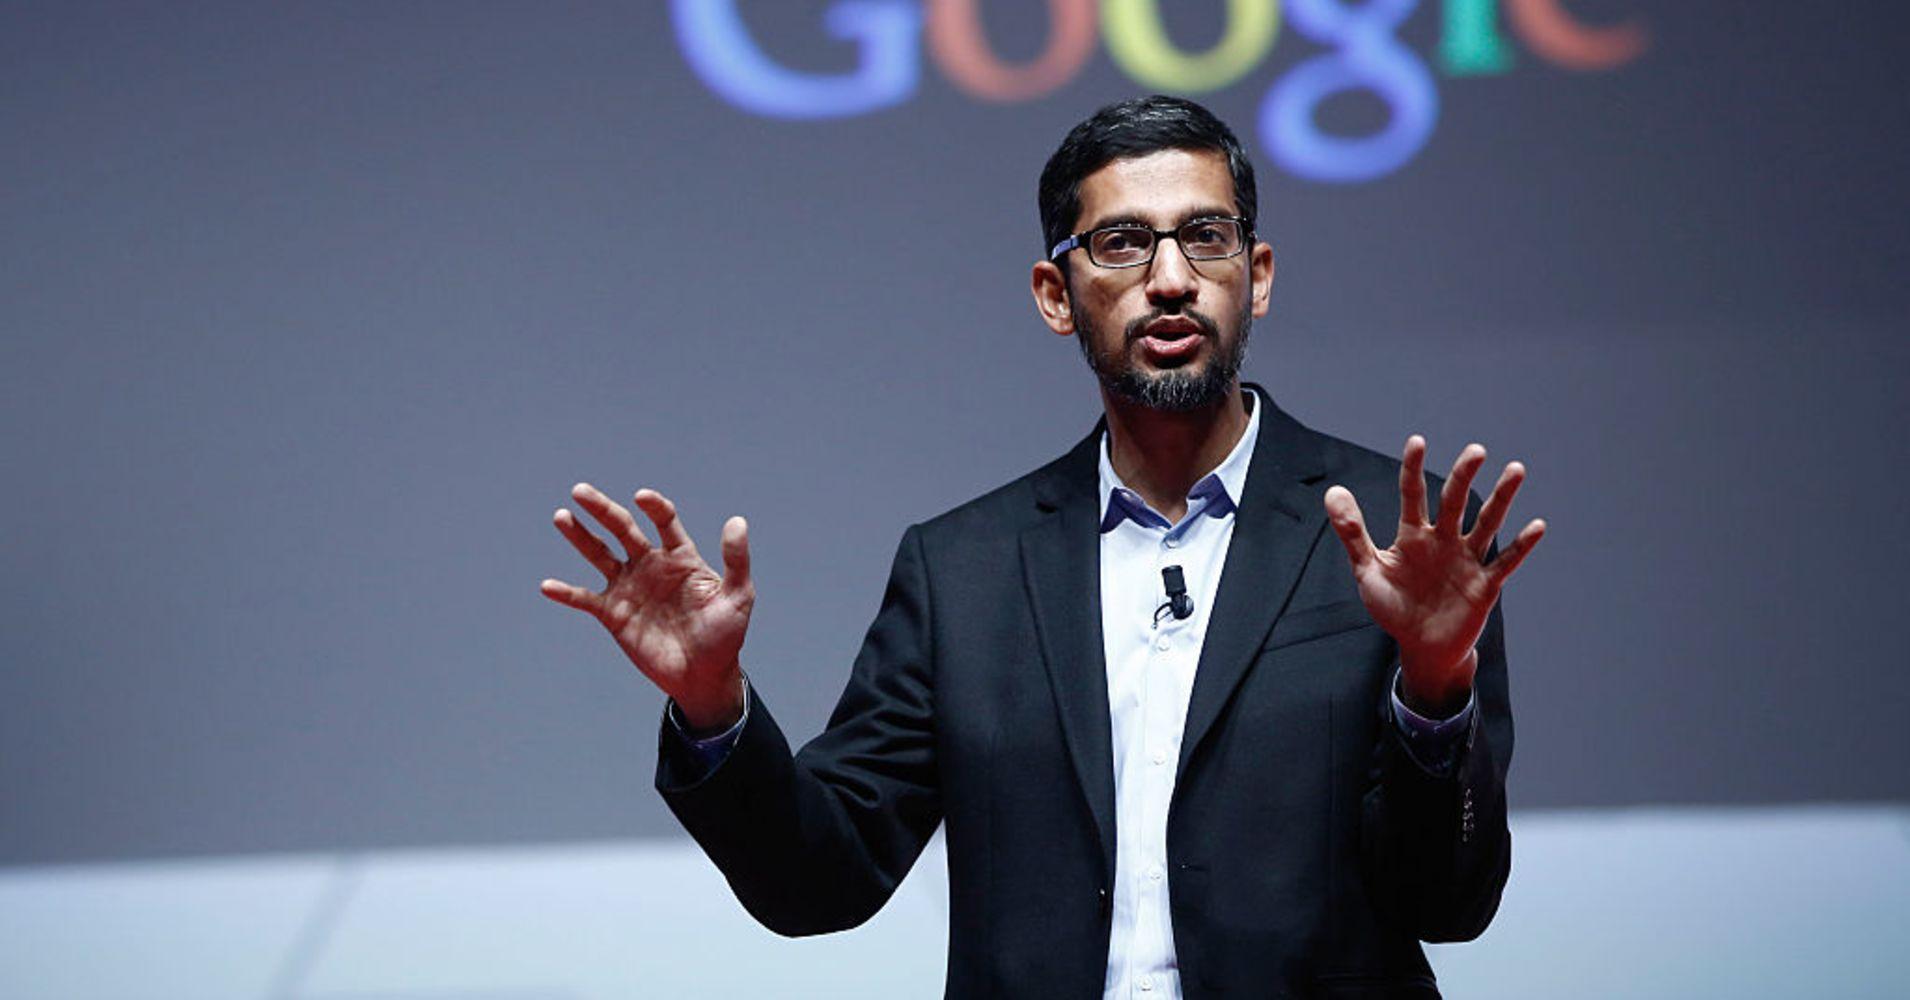 Google CEO Sundar Pichai Called for a Companywide Moment of Silence to  Recognize George Floyd | Entrepreneur